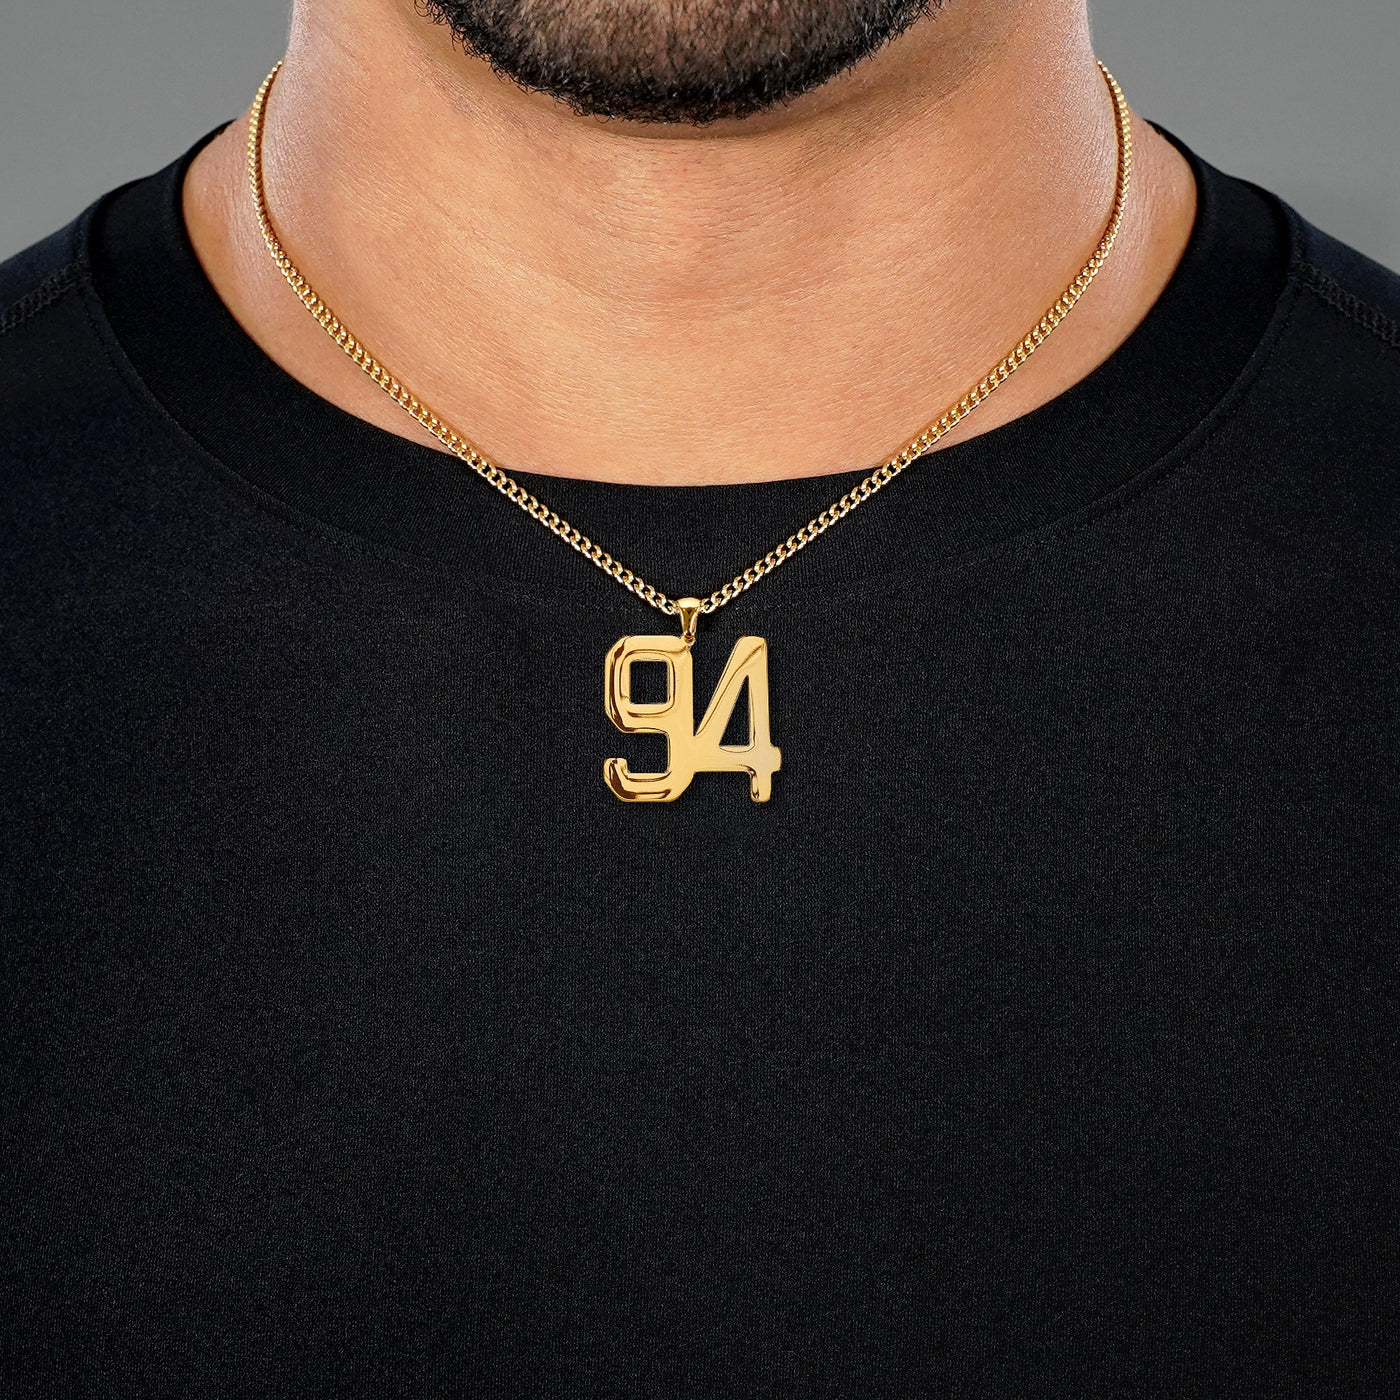 94 Number Pendant with Chain Necklace - Gold Plated Stainless Steel